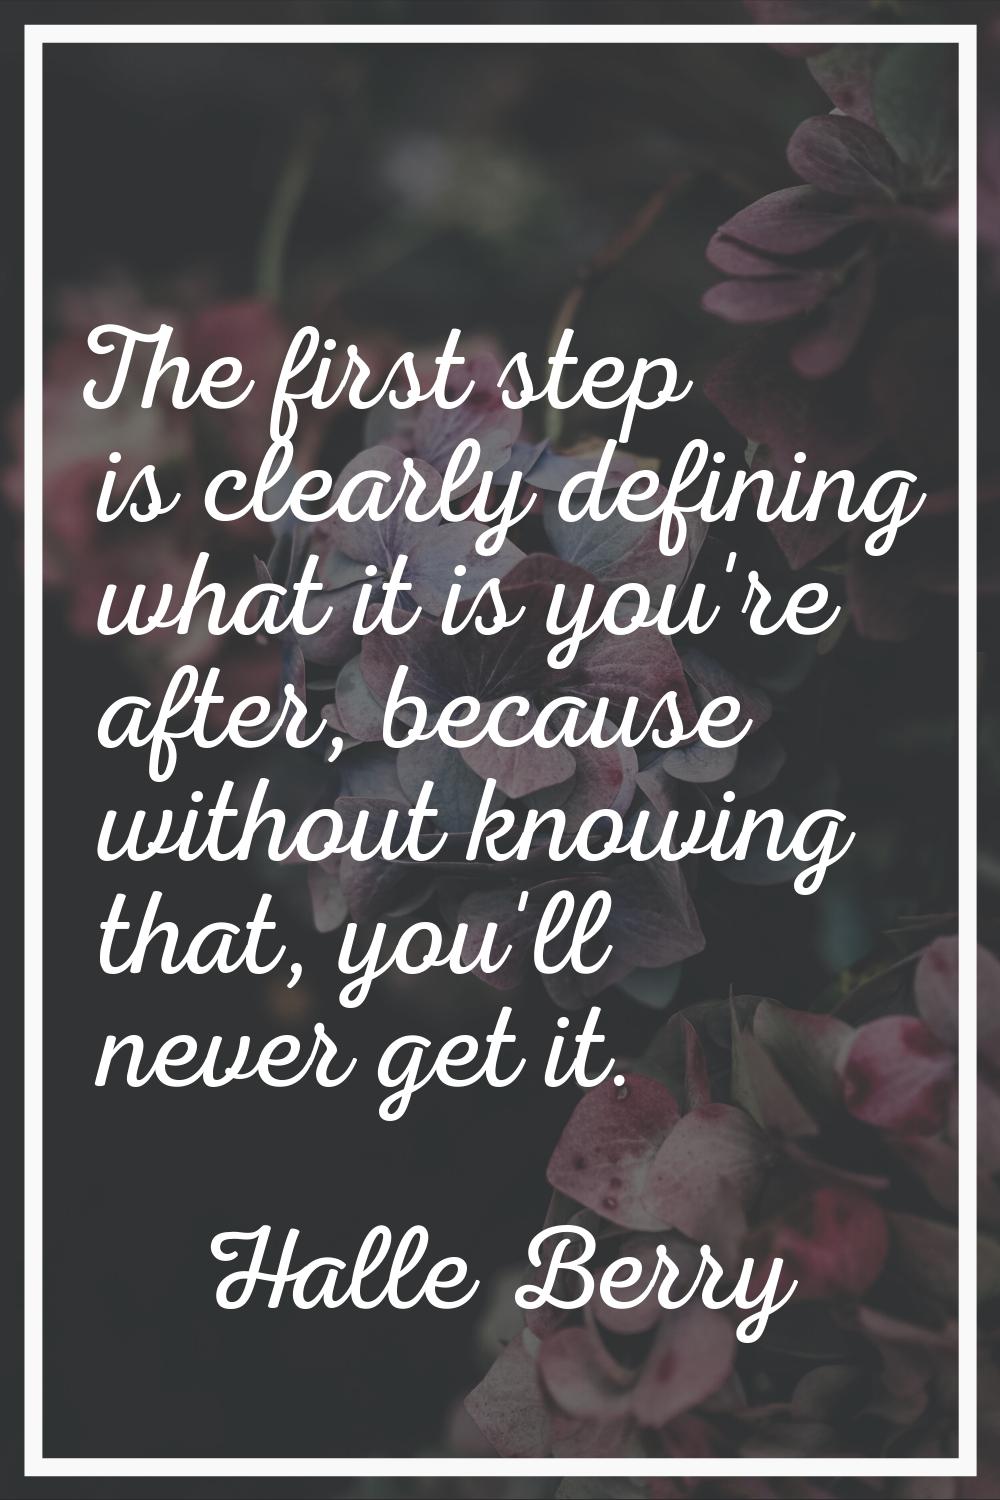 The first step is clearly defining what it is you're after, because without knowing that, you'll ne